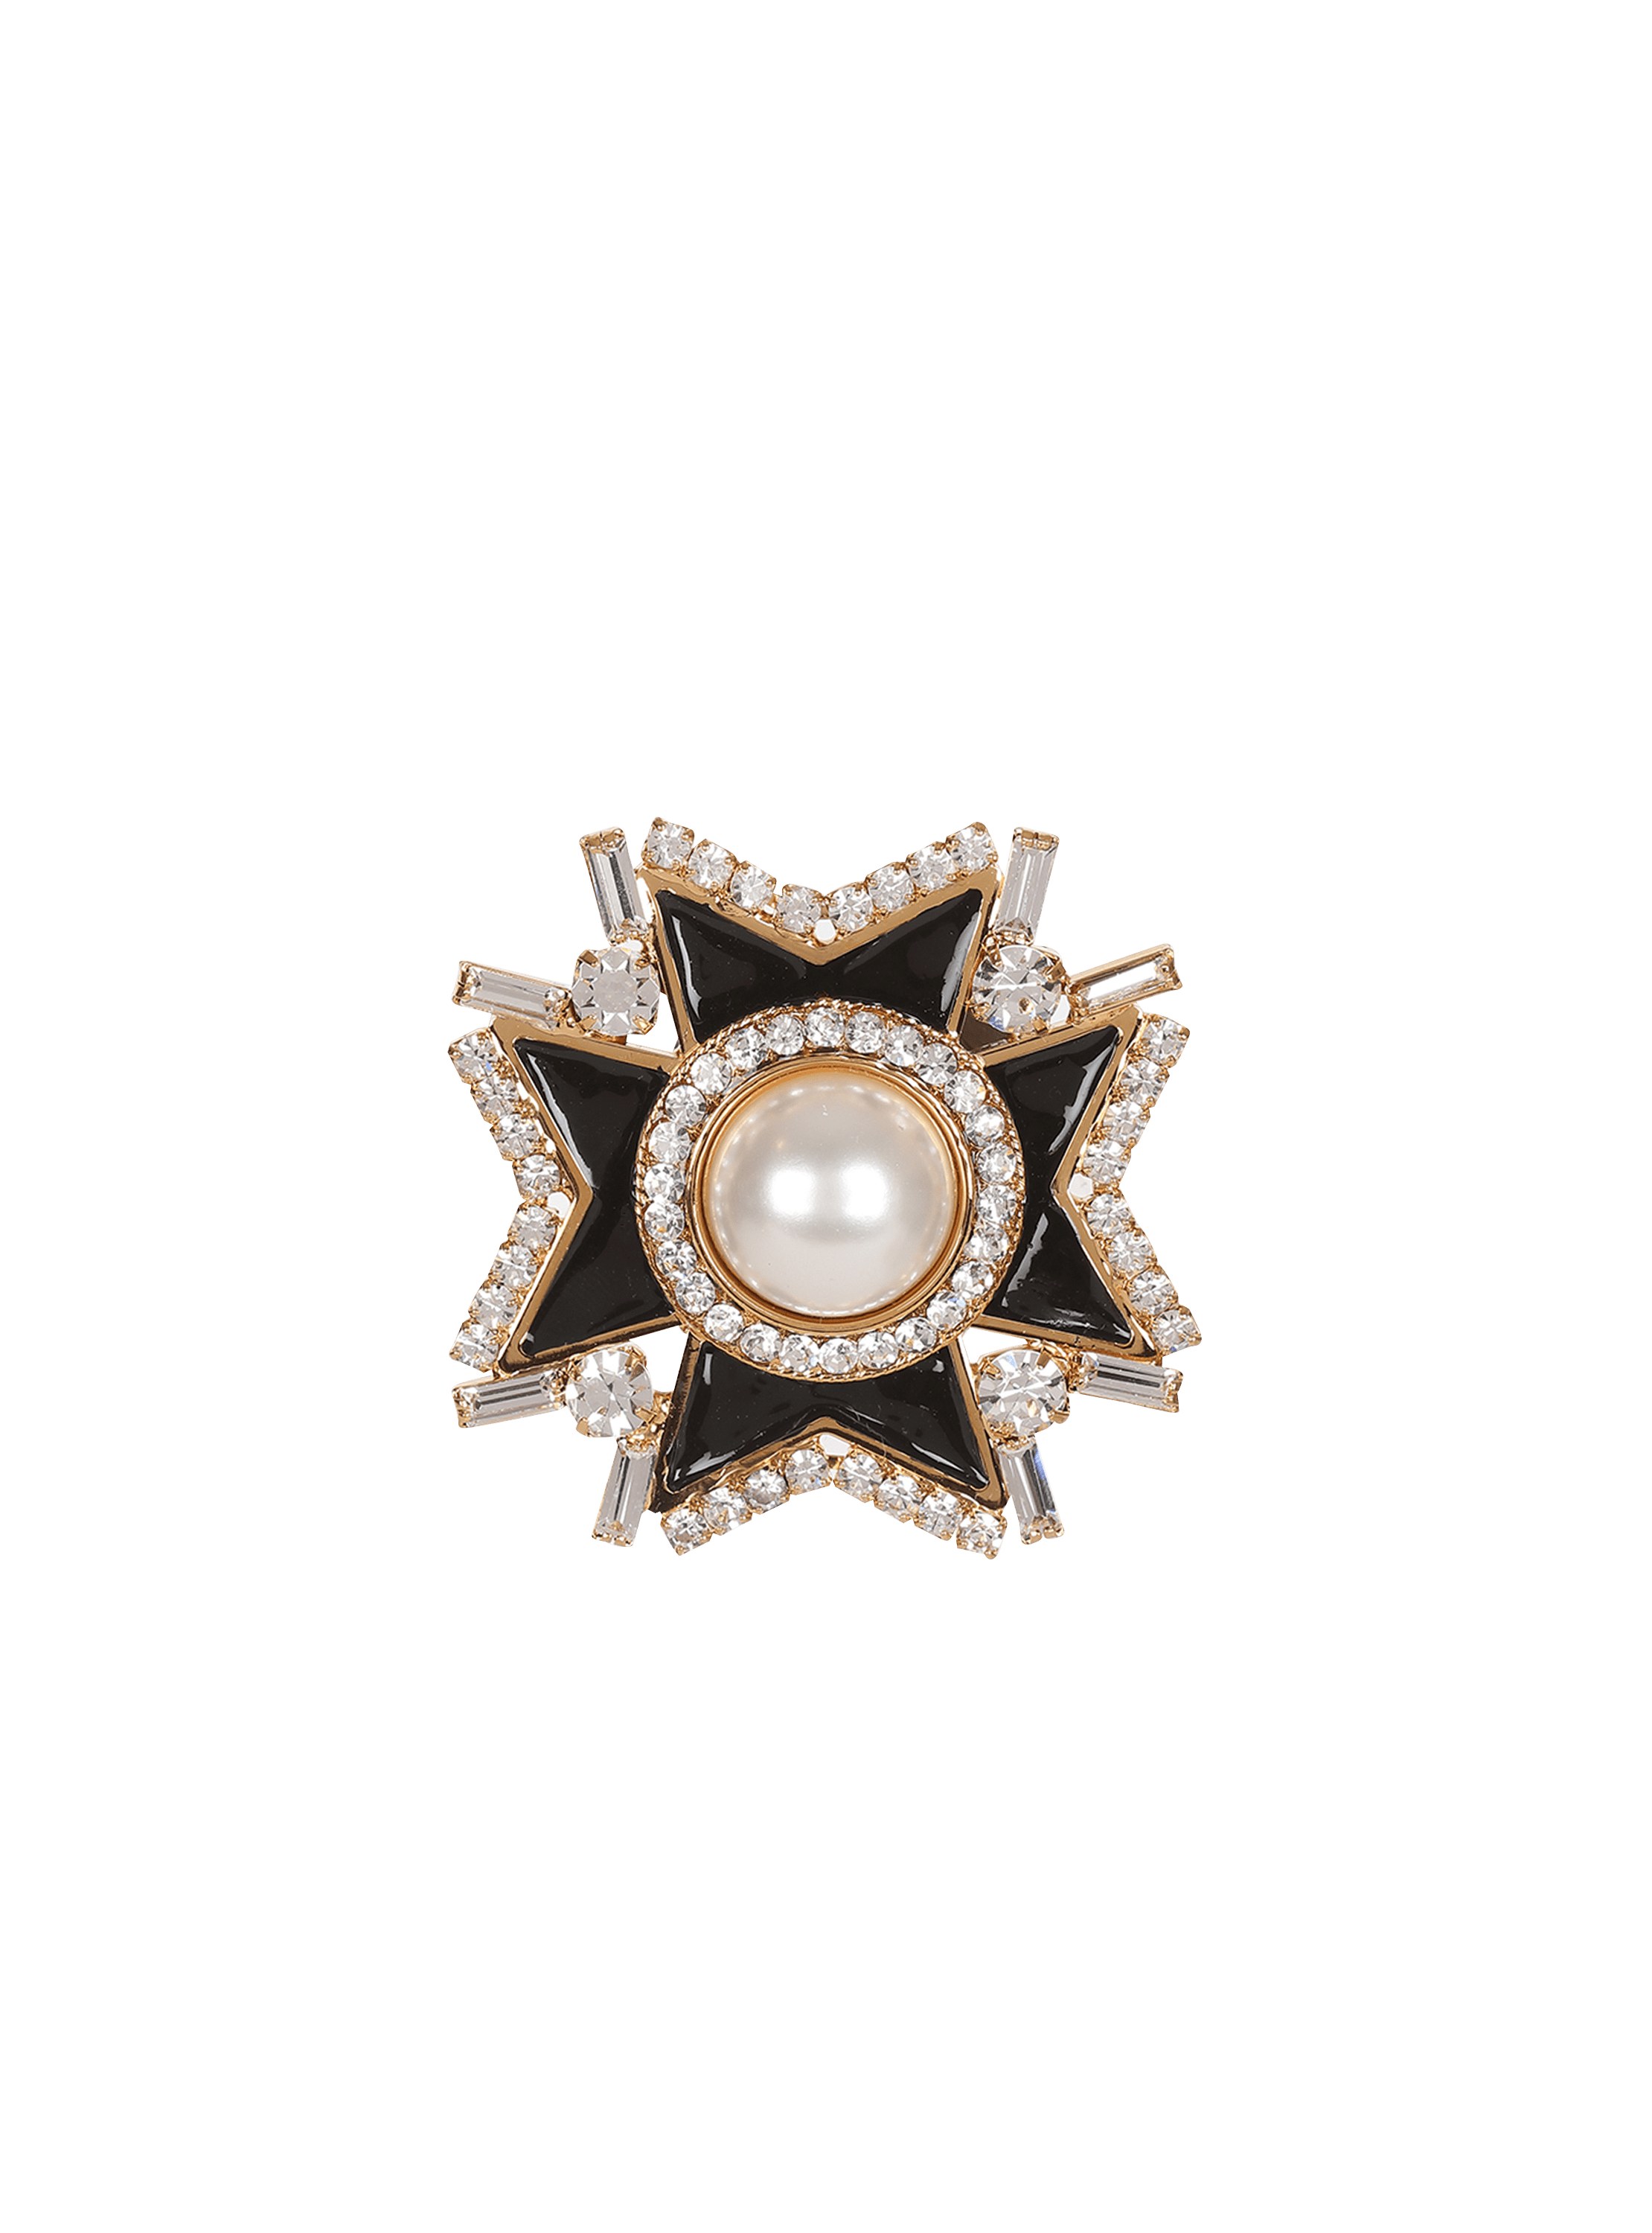 Metal brooch with pearls and rhinestones